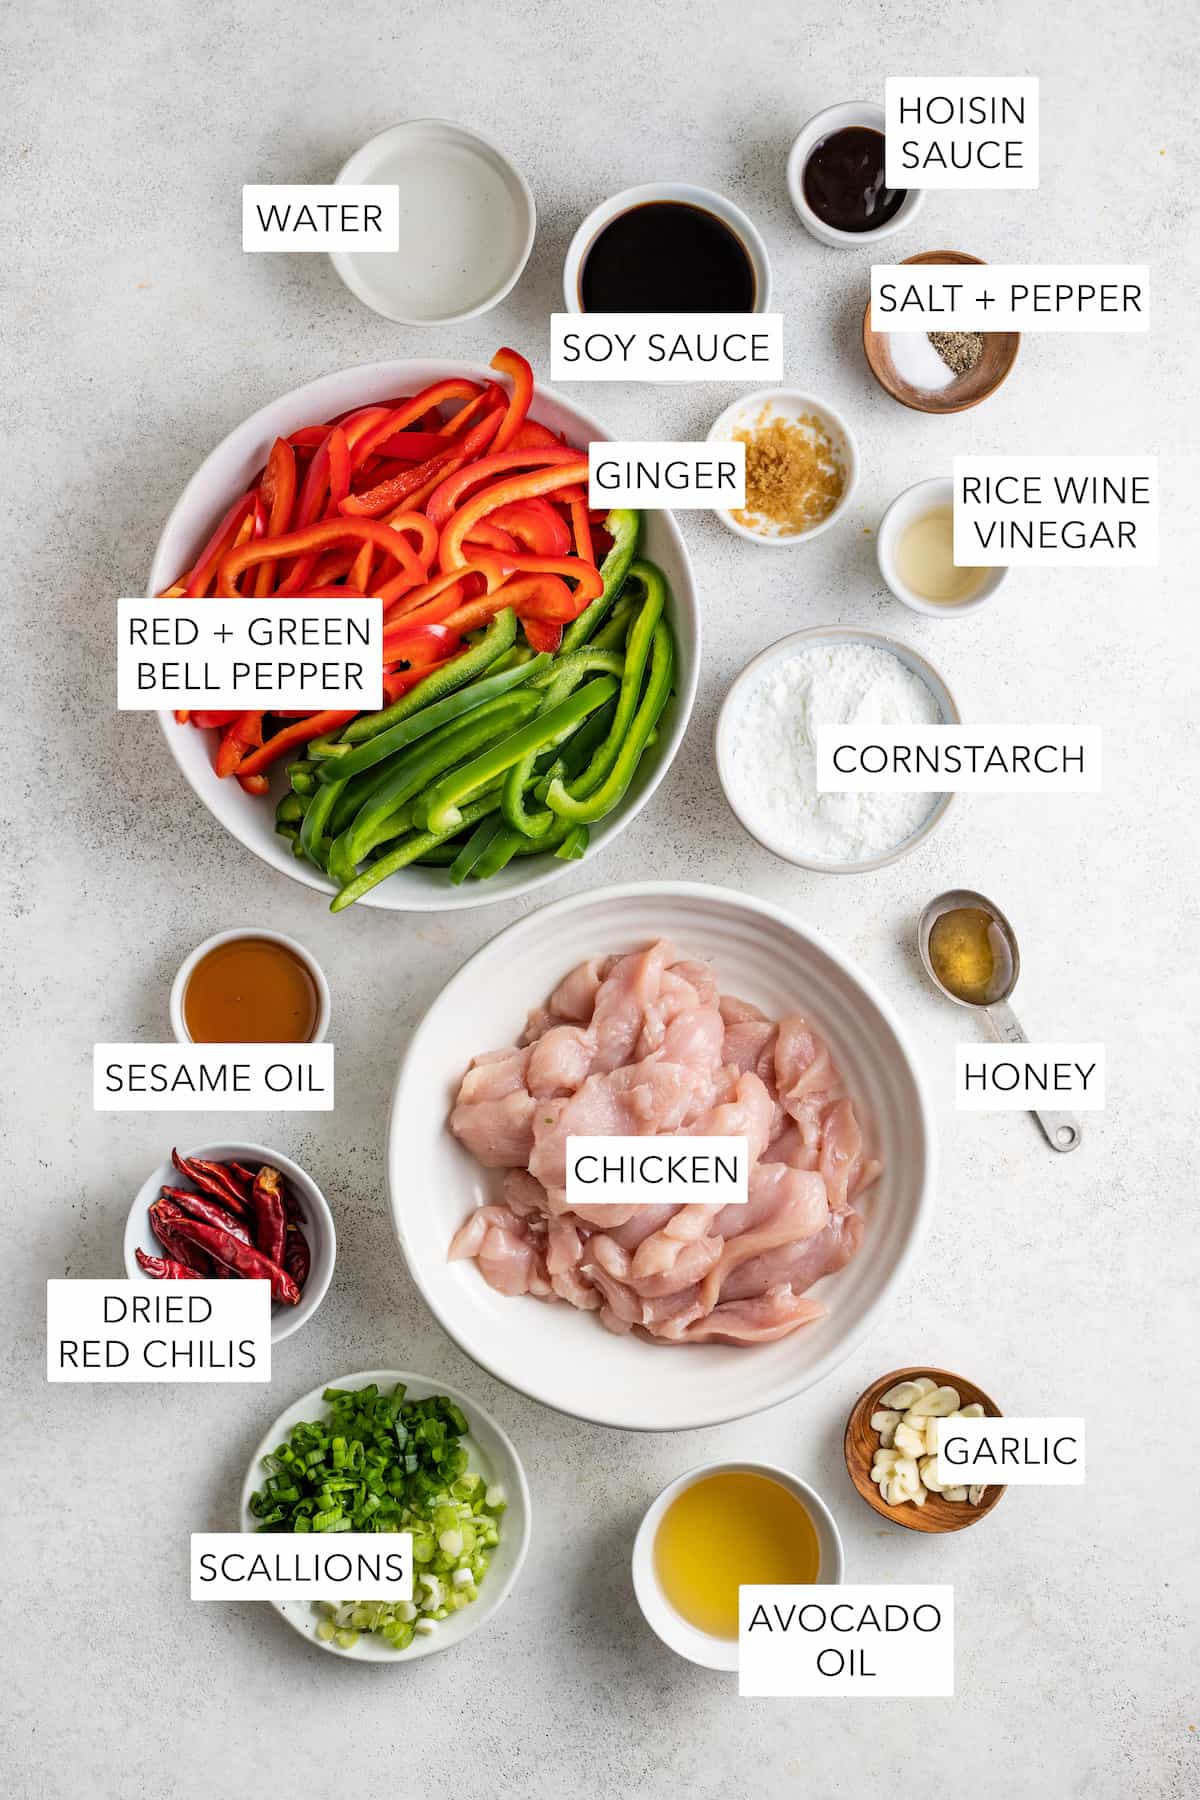 Ingredients for Szechuan chicken separated into bowls and labeled.